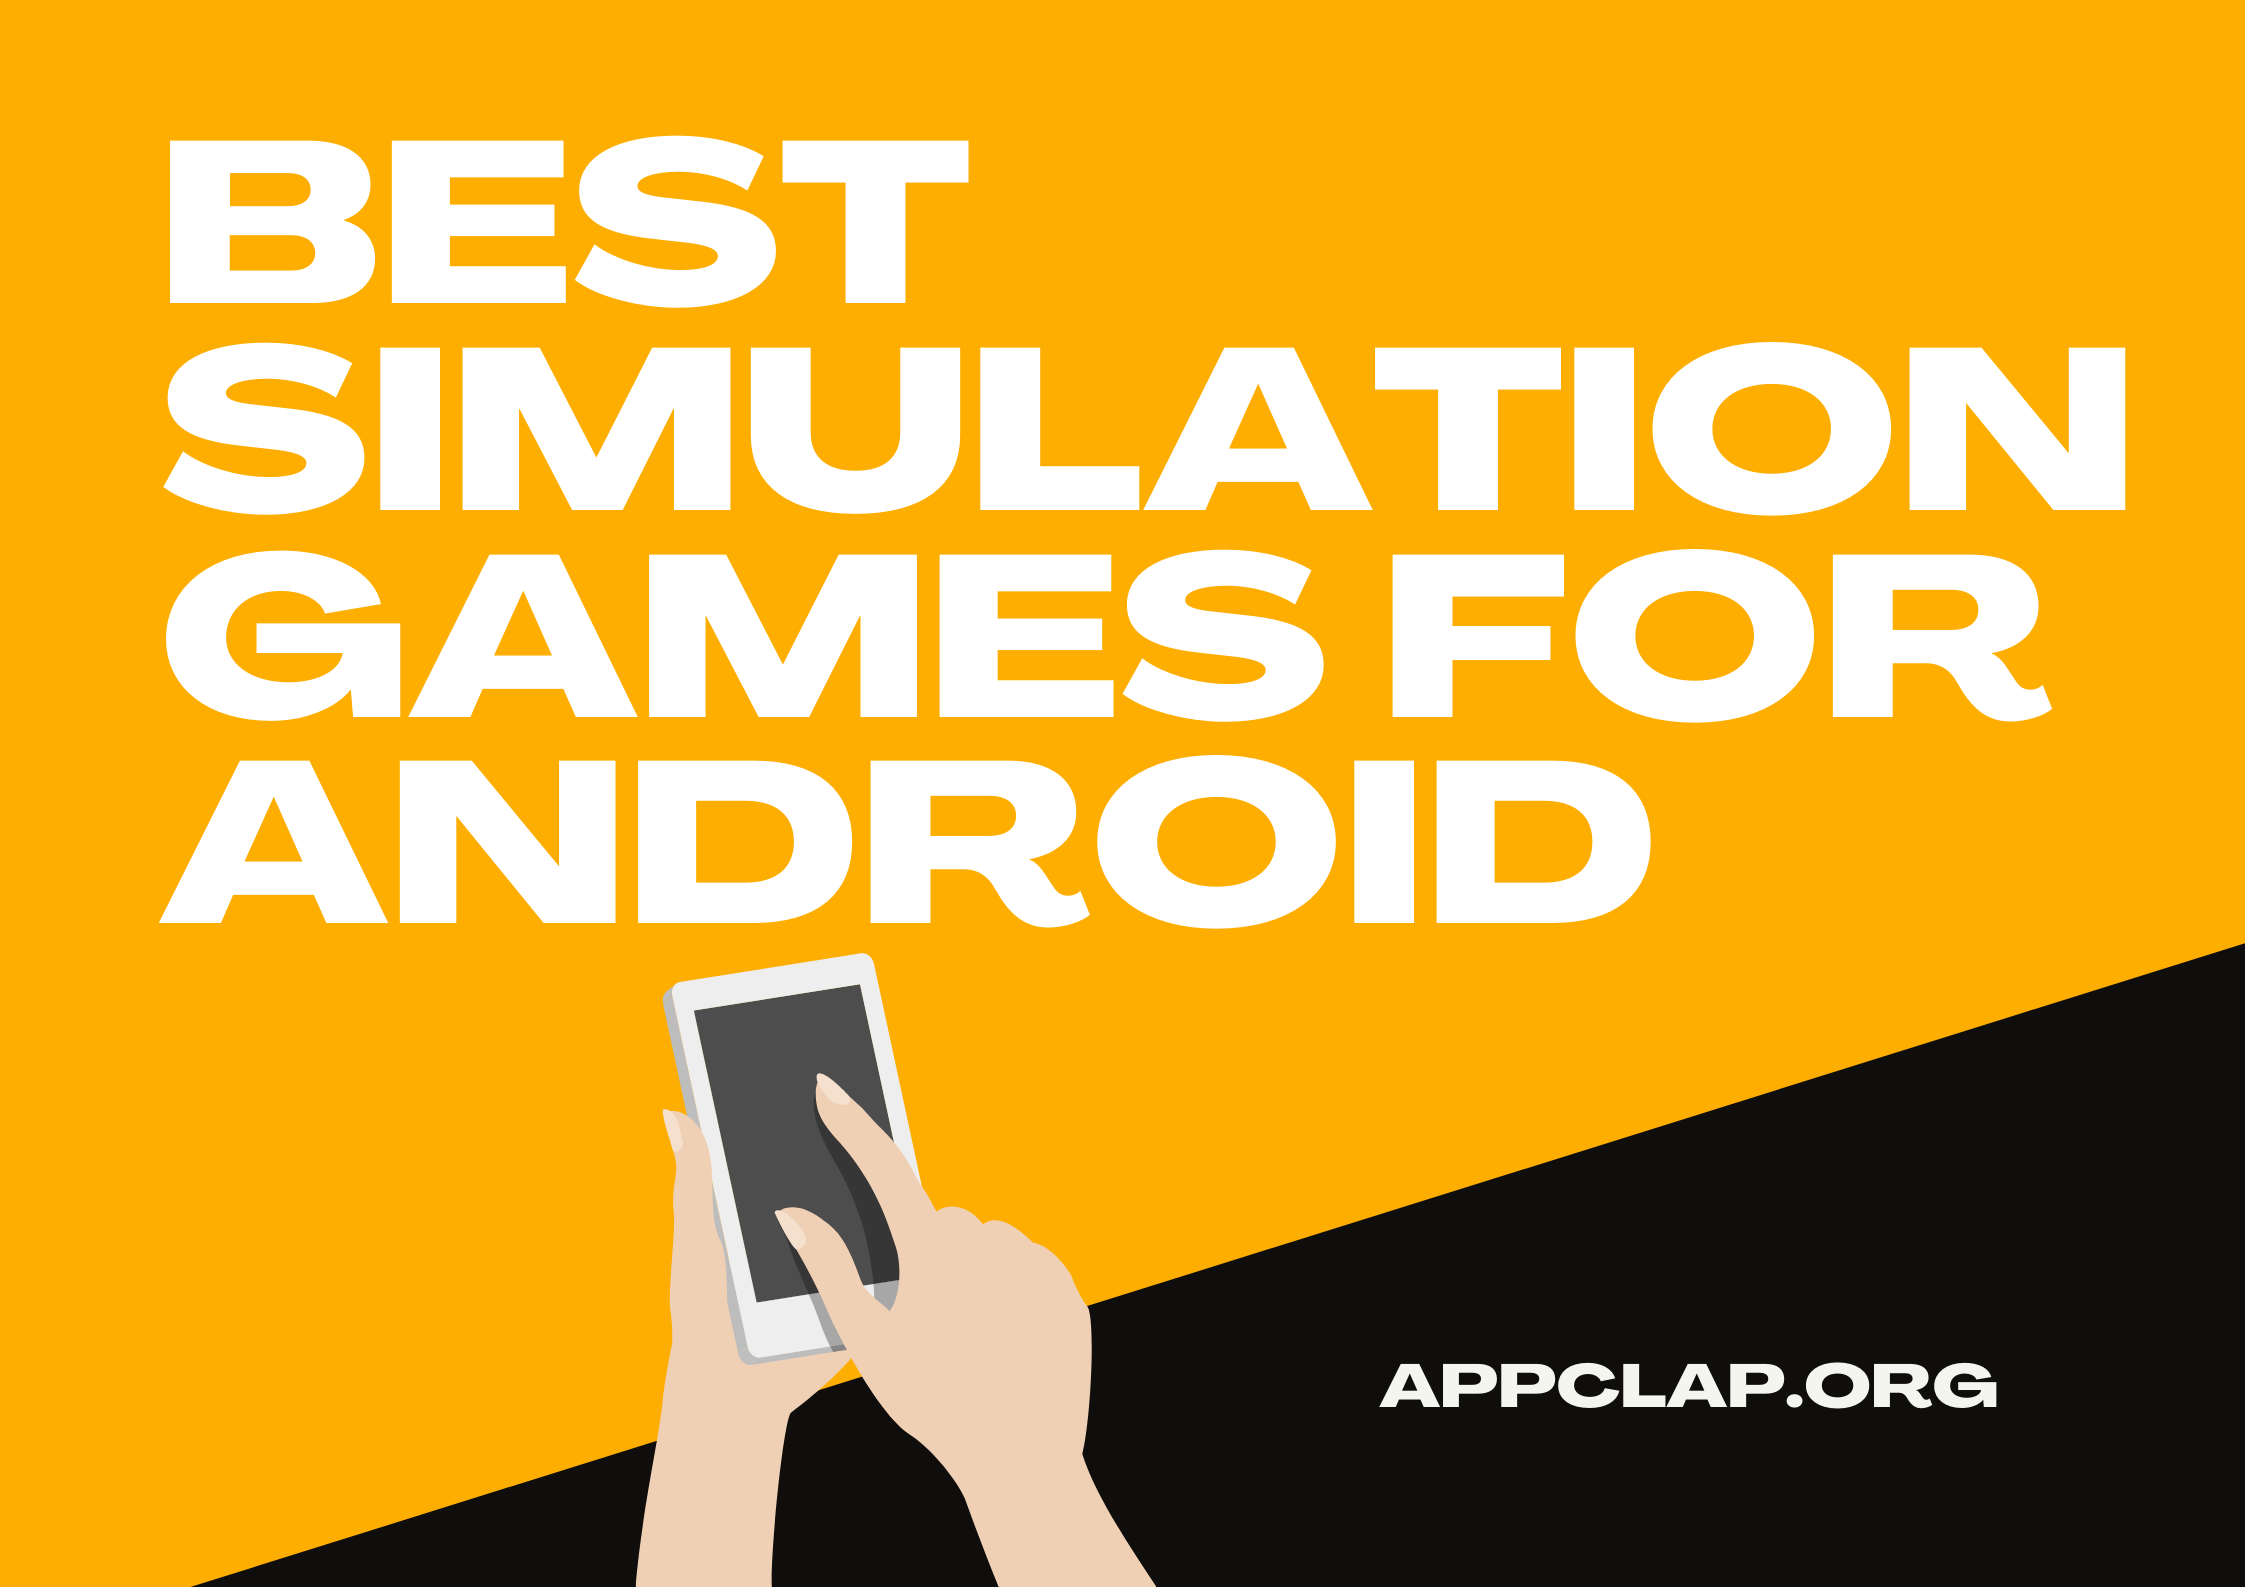 Best Simulation Games for Android